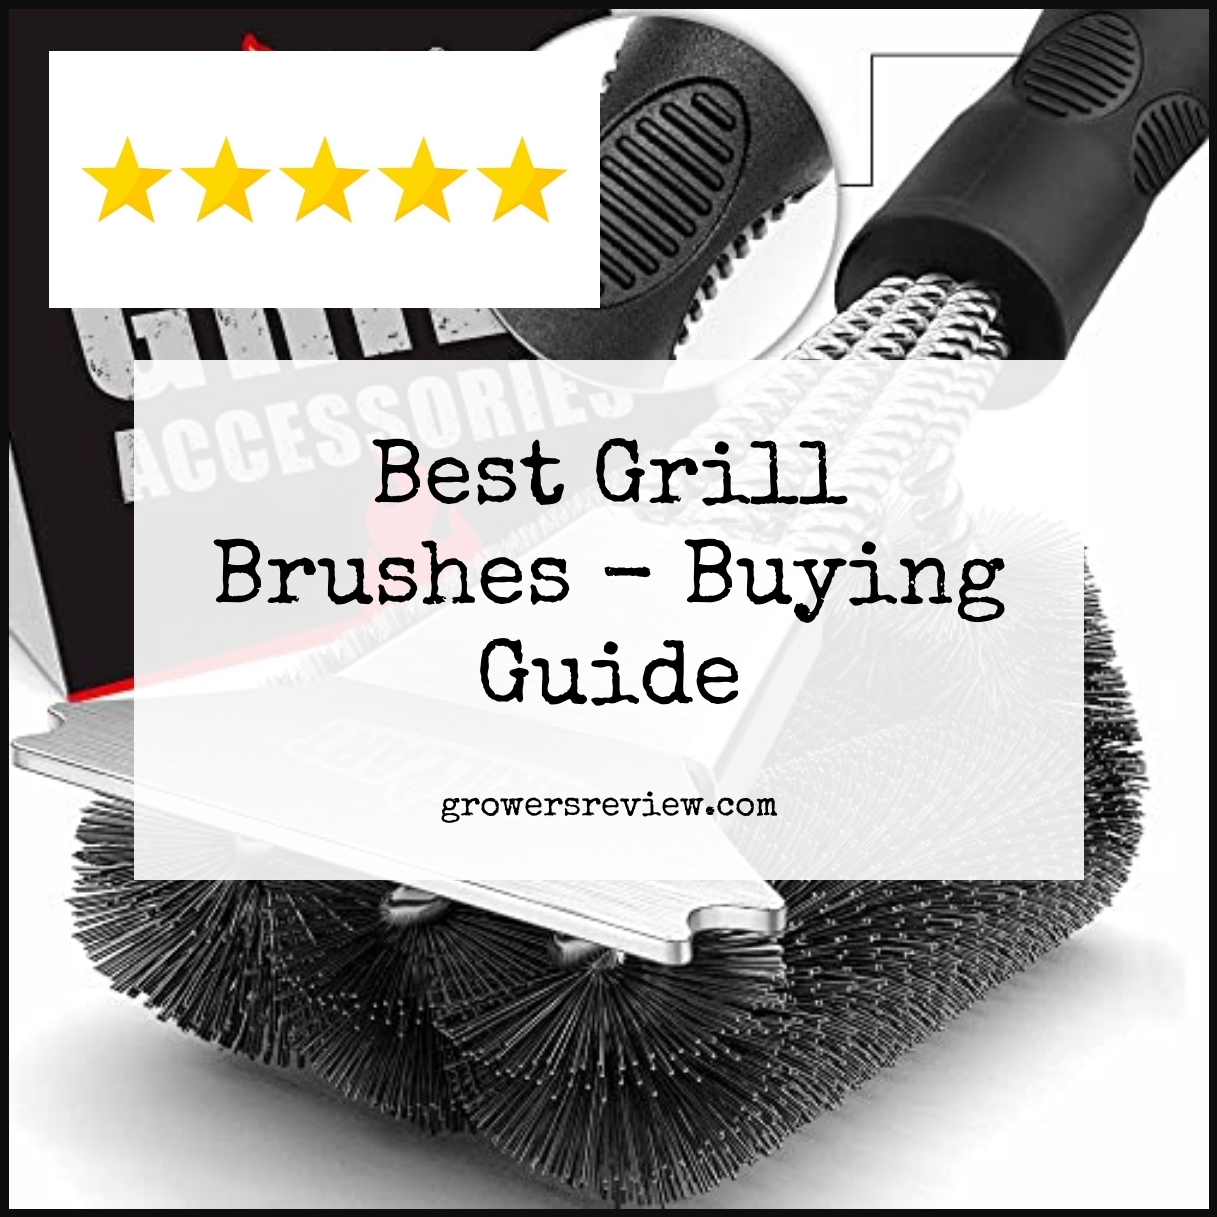 Best Grill Brushes - Buying Guide